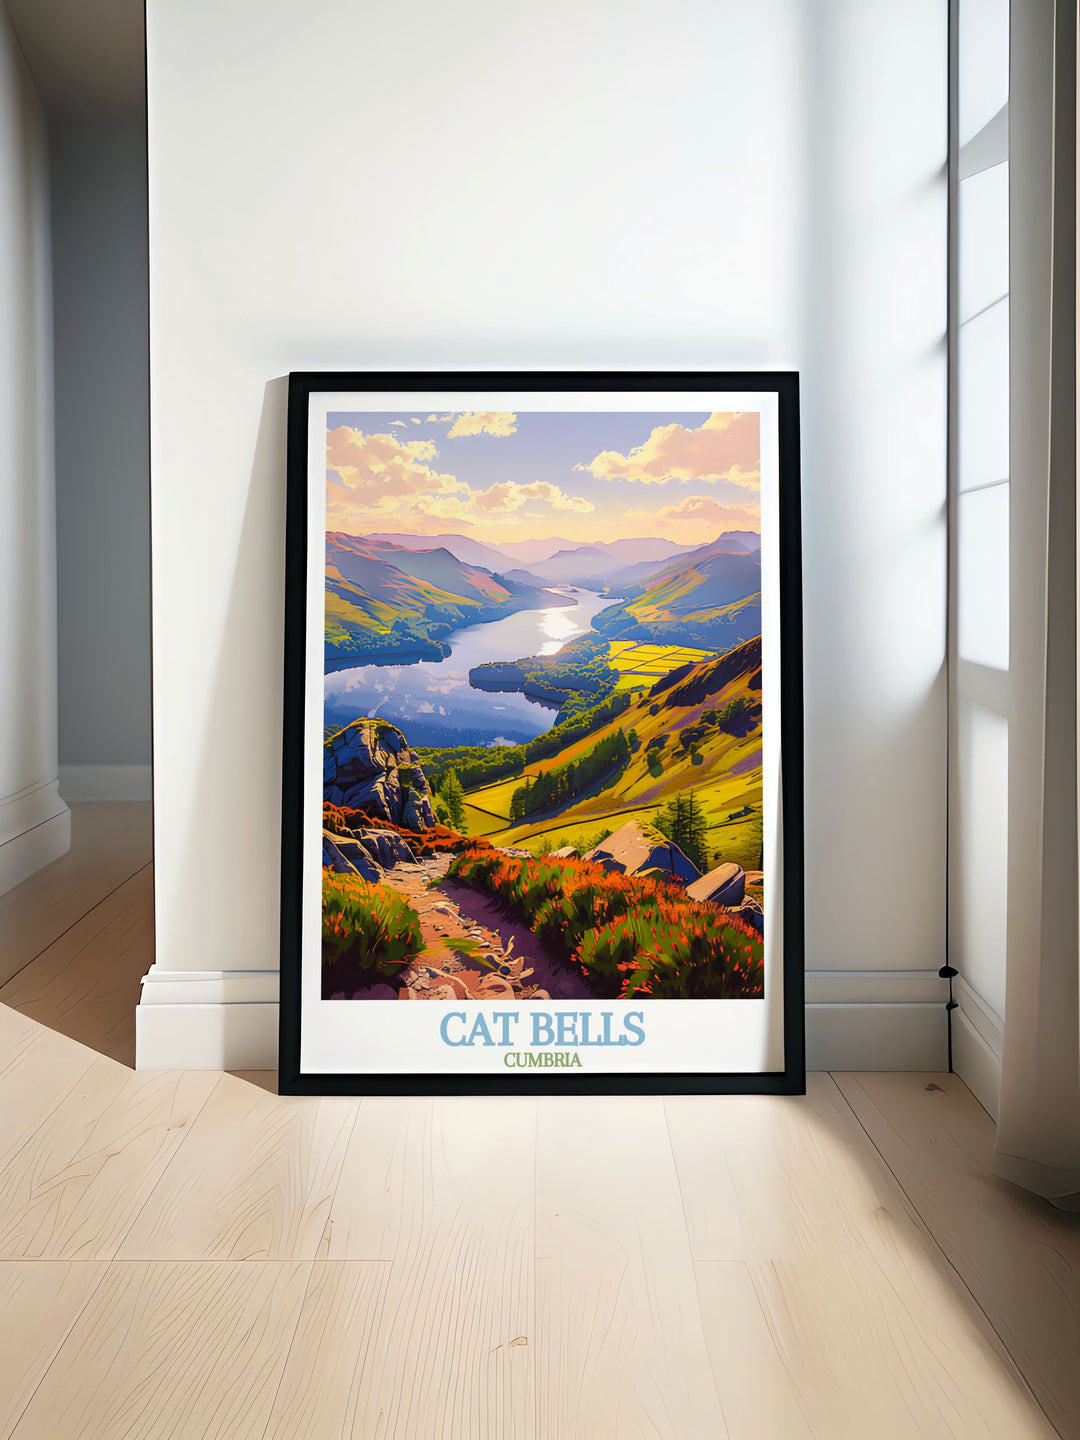 Cat Bells Summit travel poster featuring the serene landscape of Derwentwater in the Lake District perfect for adding a touch of nature to your home decor with detailed illustrations and vibrant colors ideal for wall decor and gifts for nature lovers.